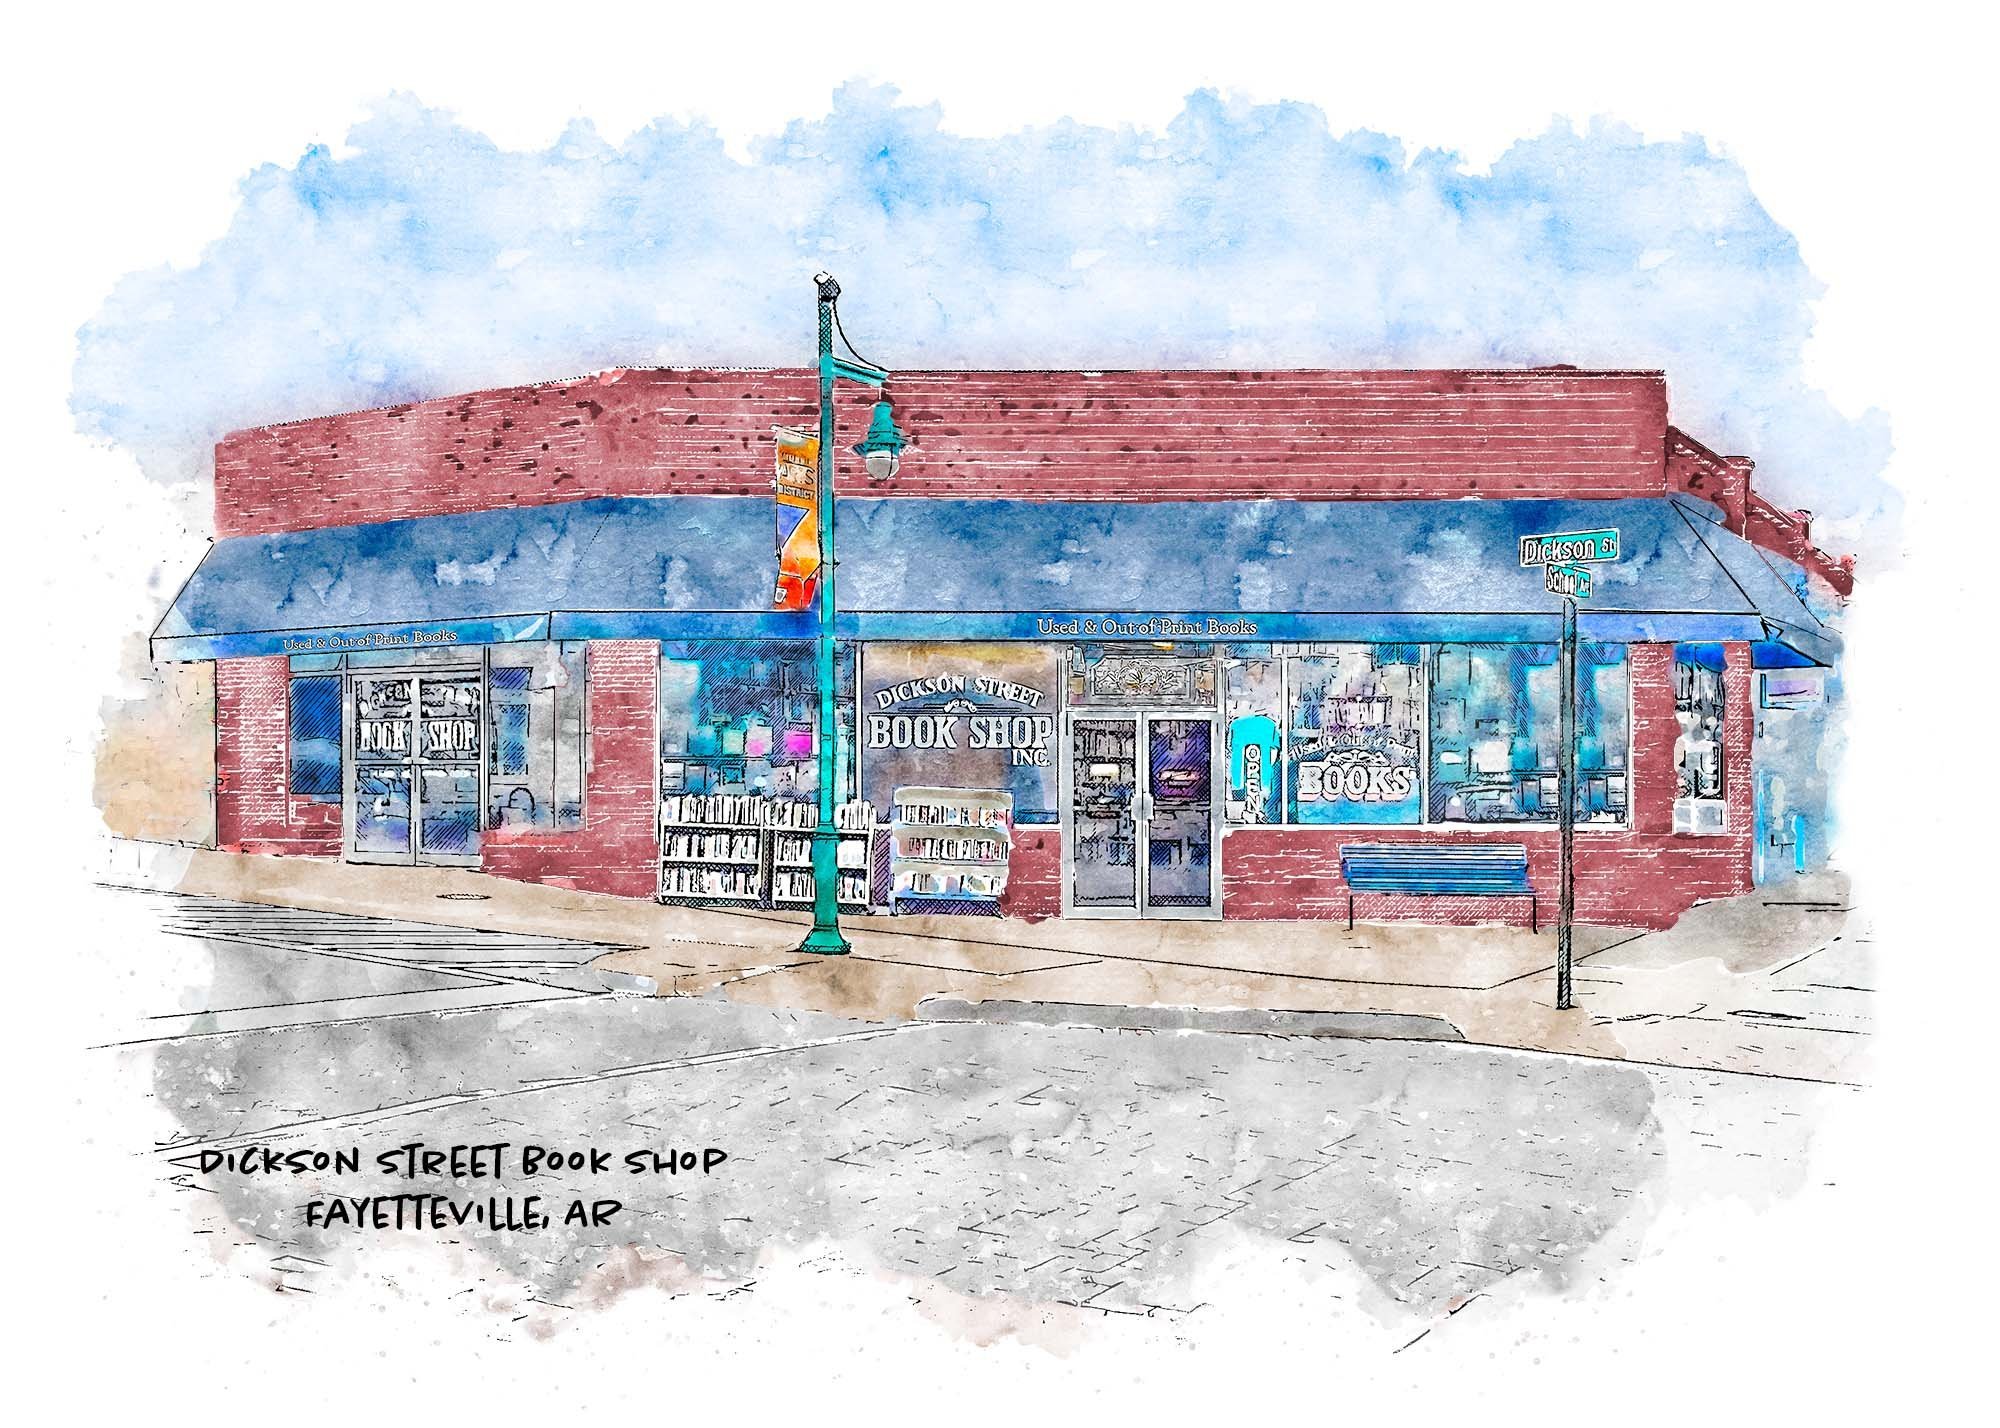 Celebrating our 200th design in our #Arkansas #Heritage collection with these two iconic #Fayetteville fixtures:  Dickson Street Bookshop and #Hugo's.  Find these two colorful prints and more from all around Arkansas at The Shops at BrickCity Fayette